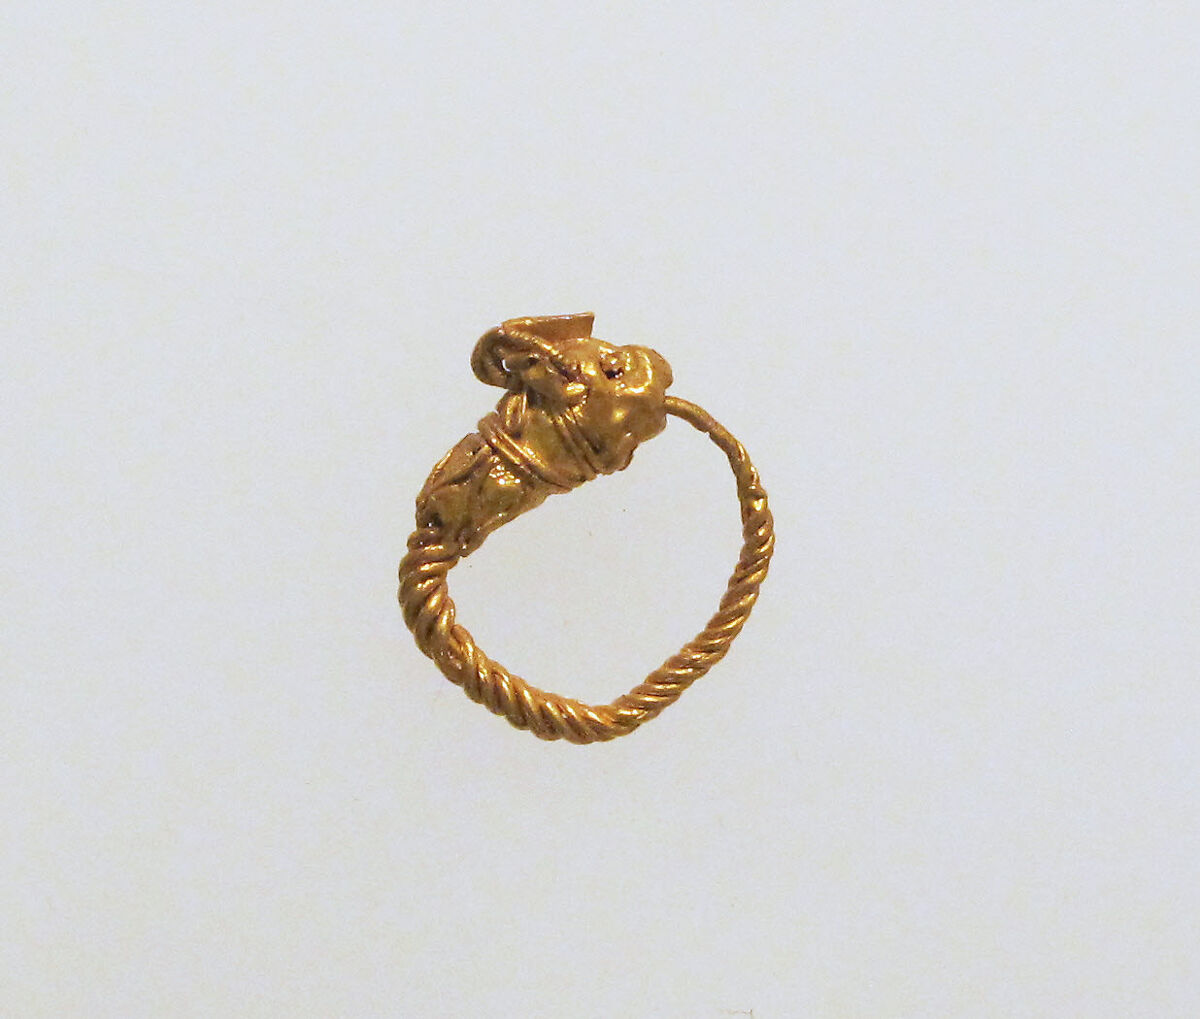 Gold earring with head of an animal, Gold, Greek 